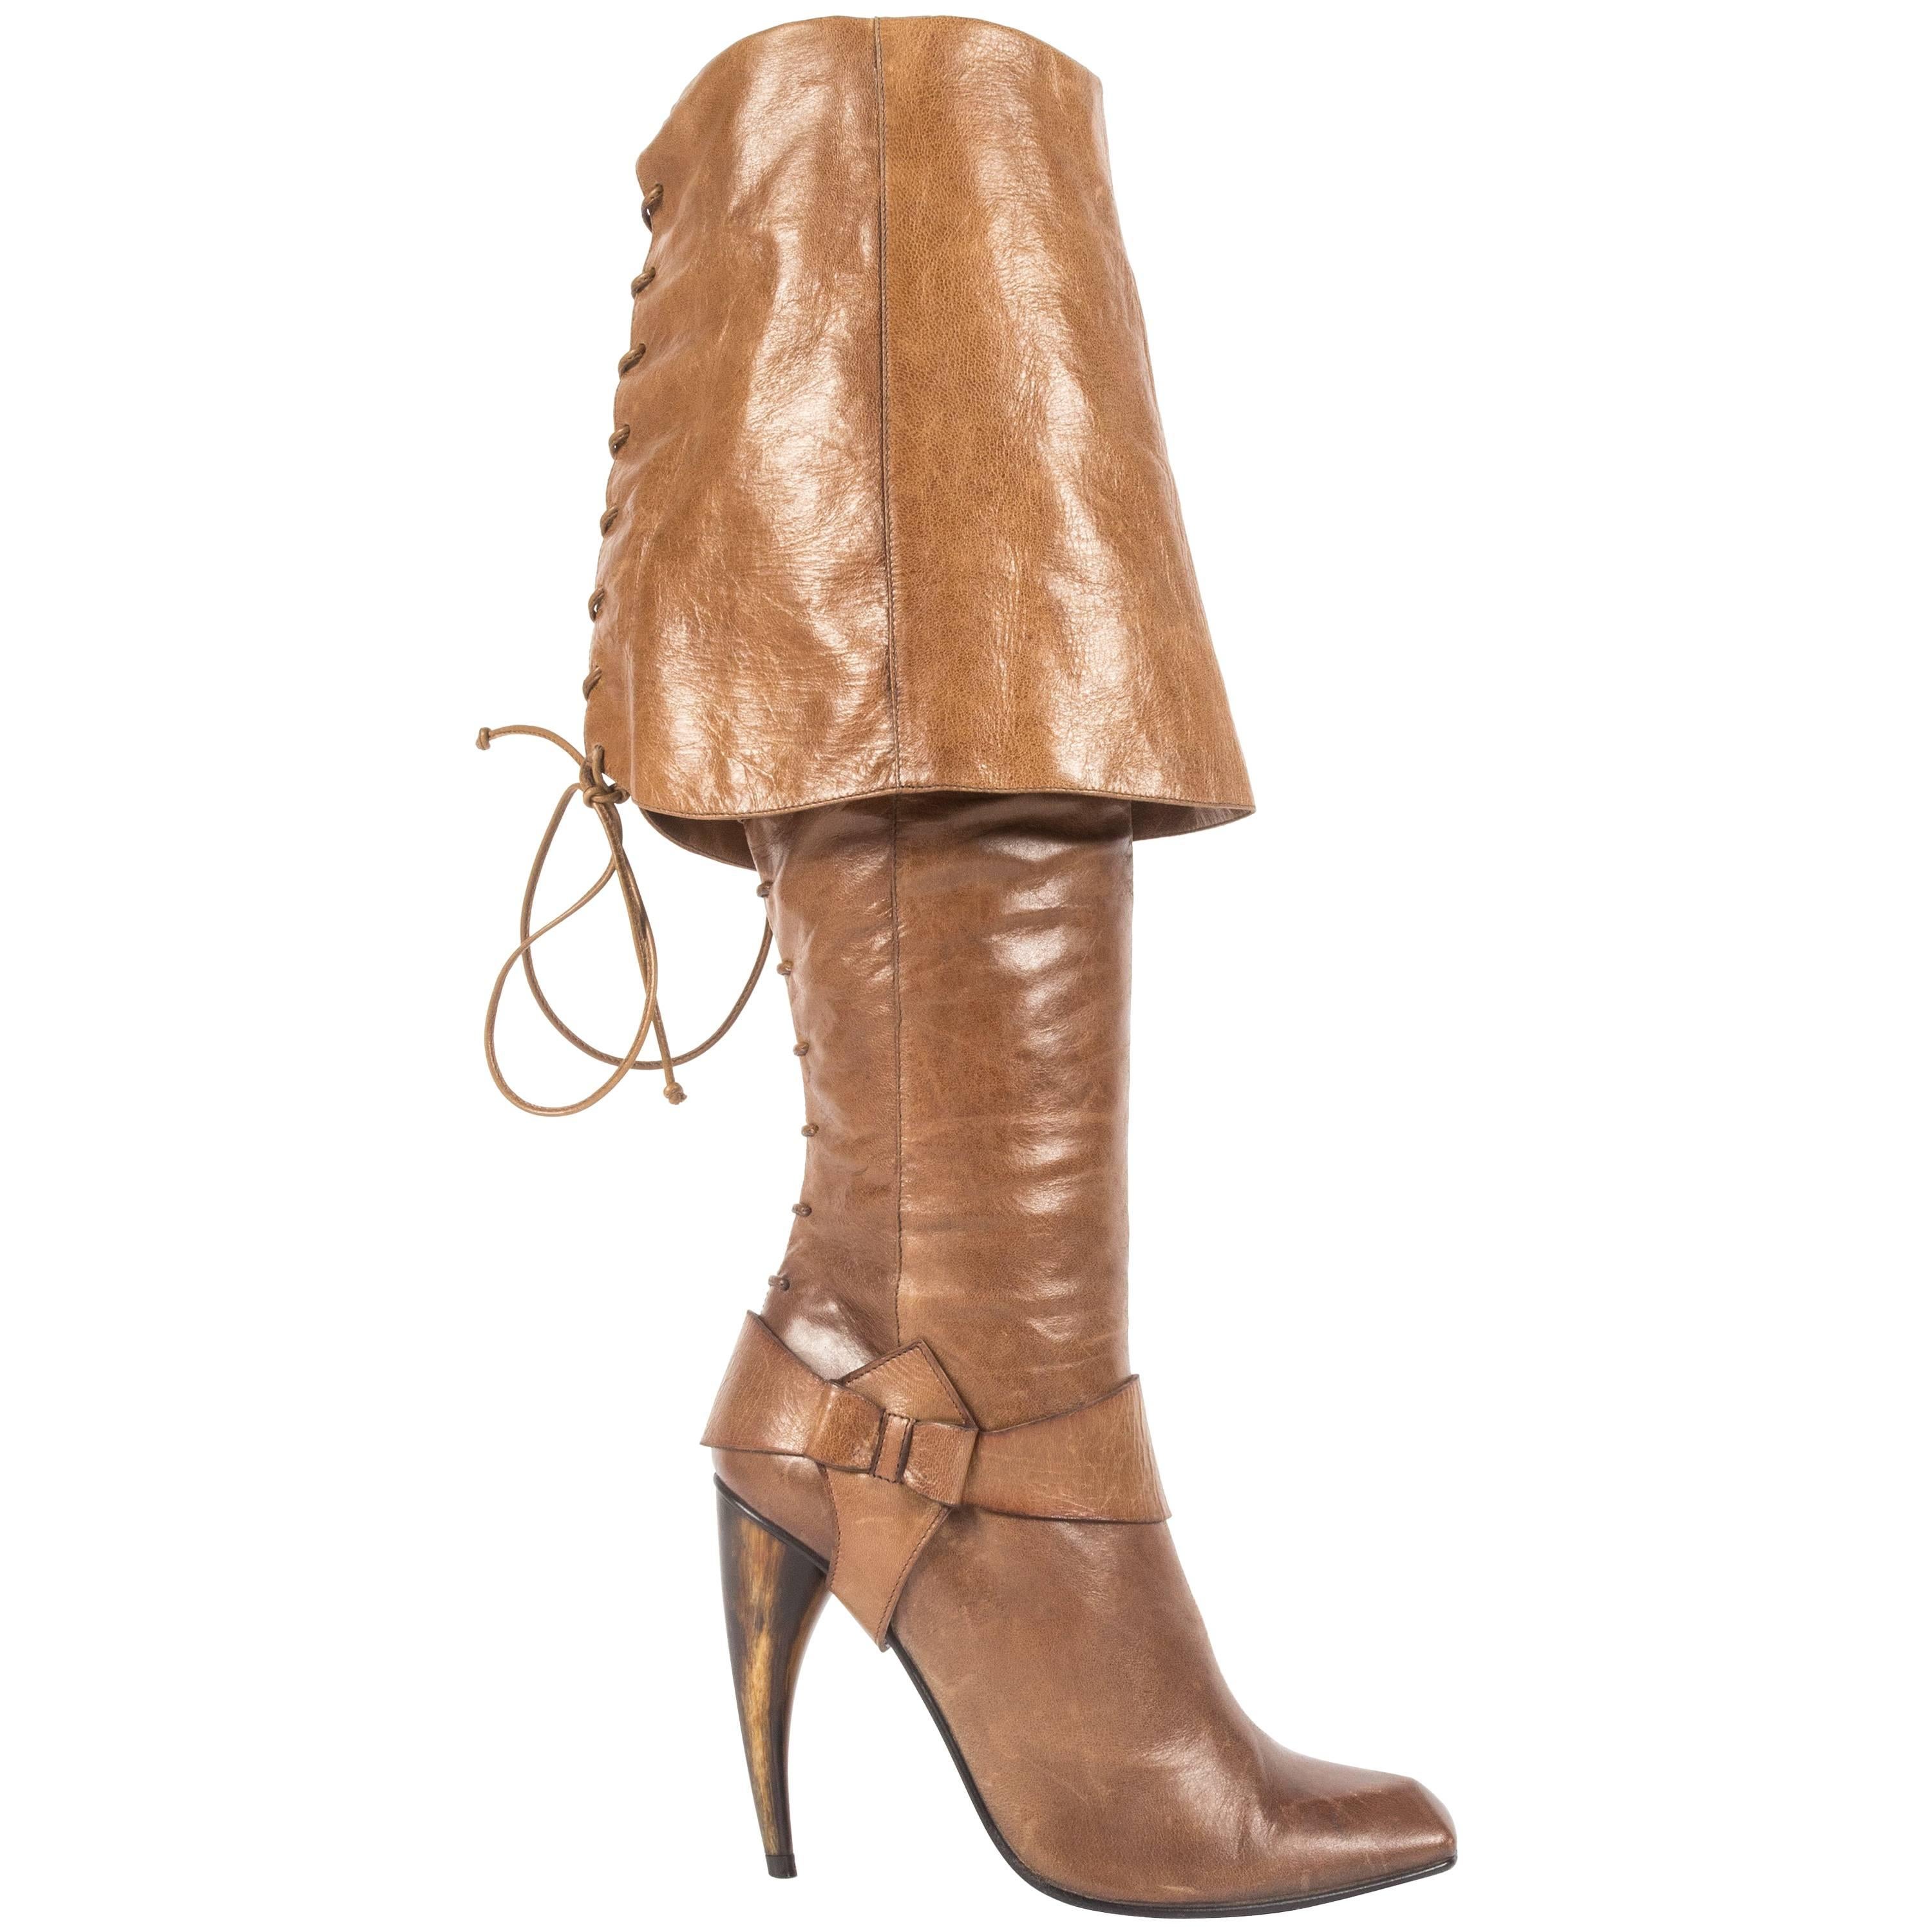 Alexander McQueen Spring-Summer 2003 tan leather turn over boots with horn heel